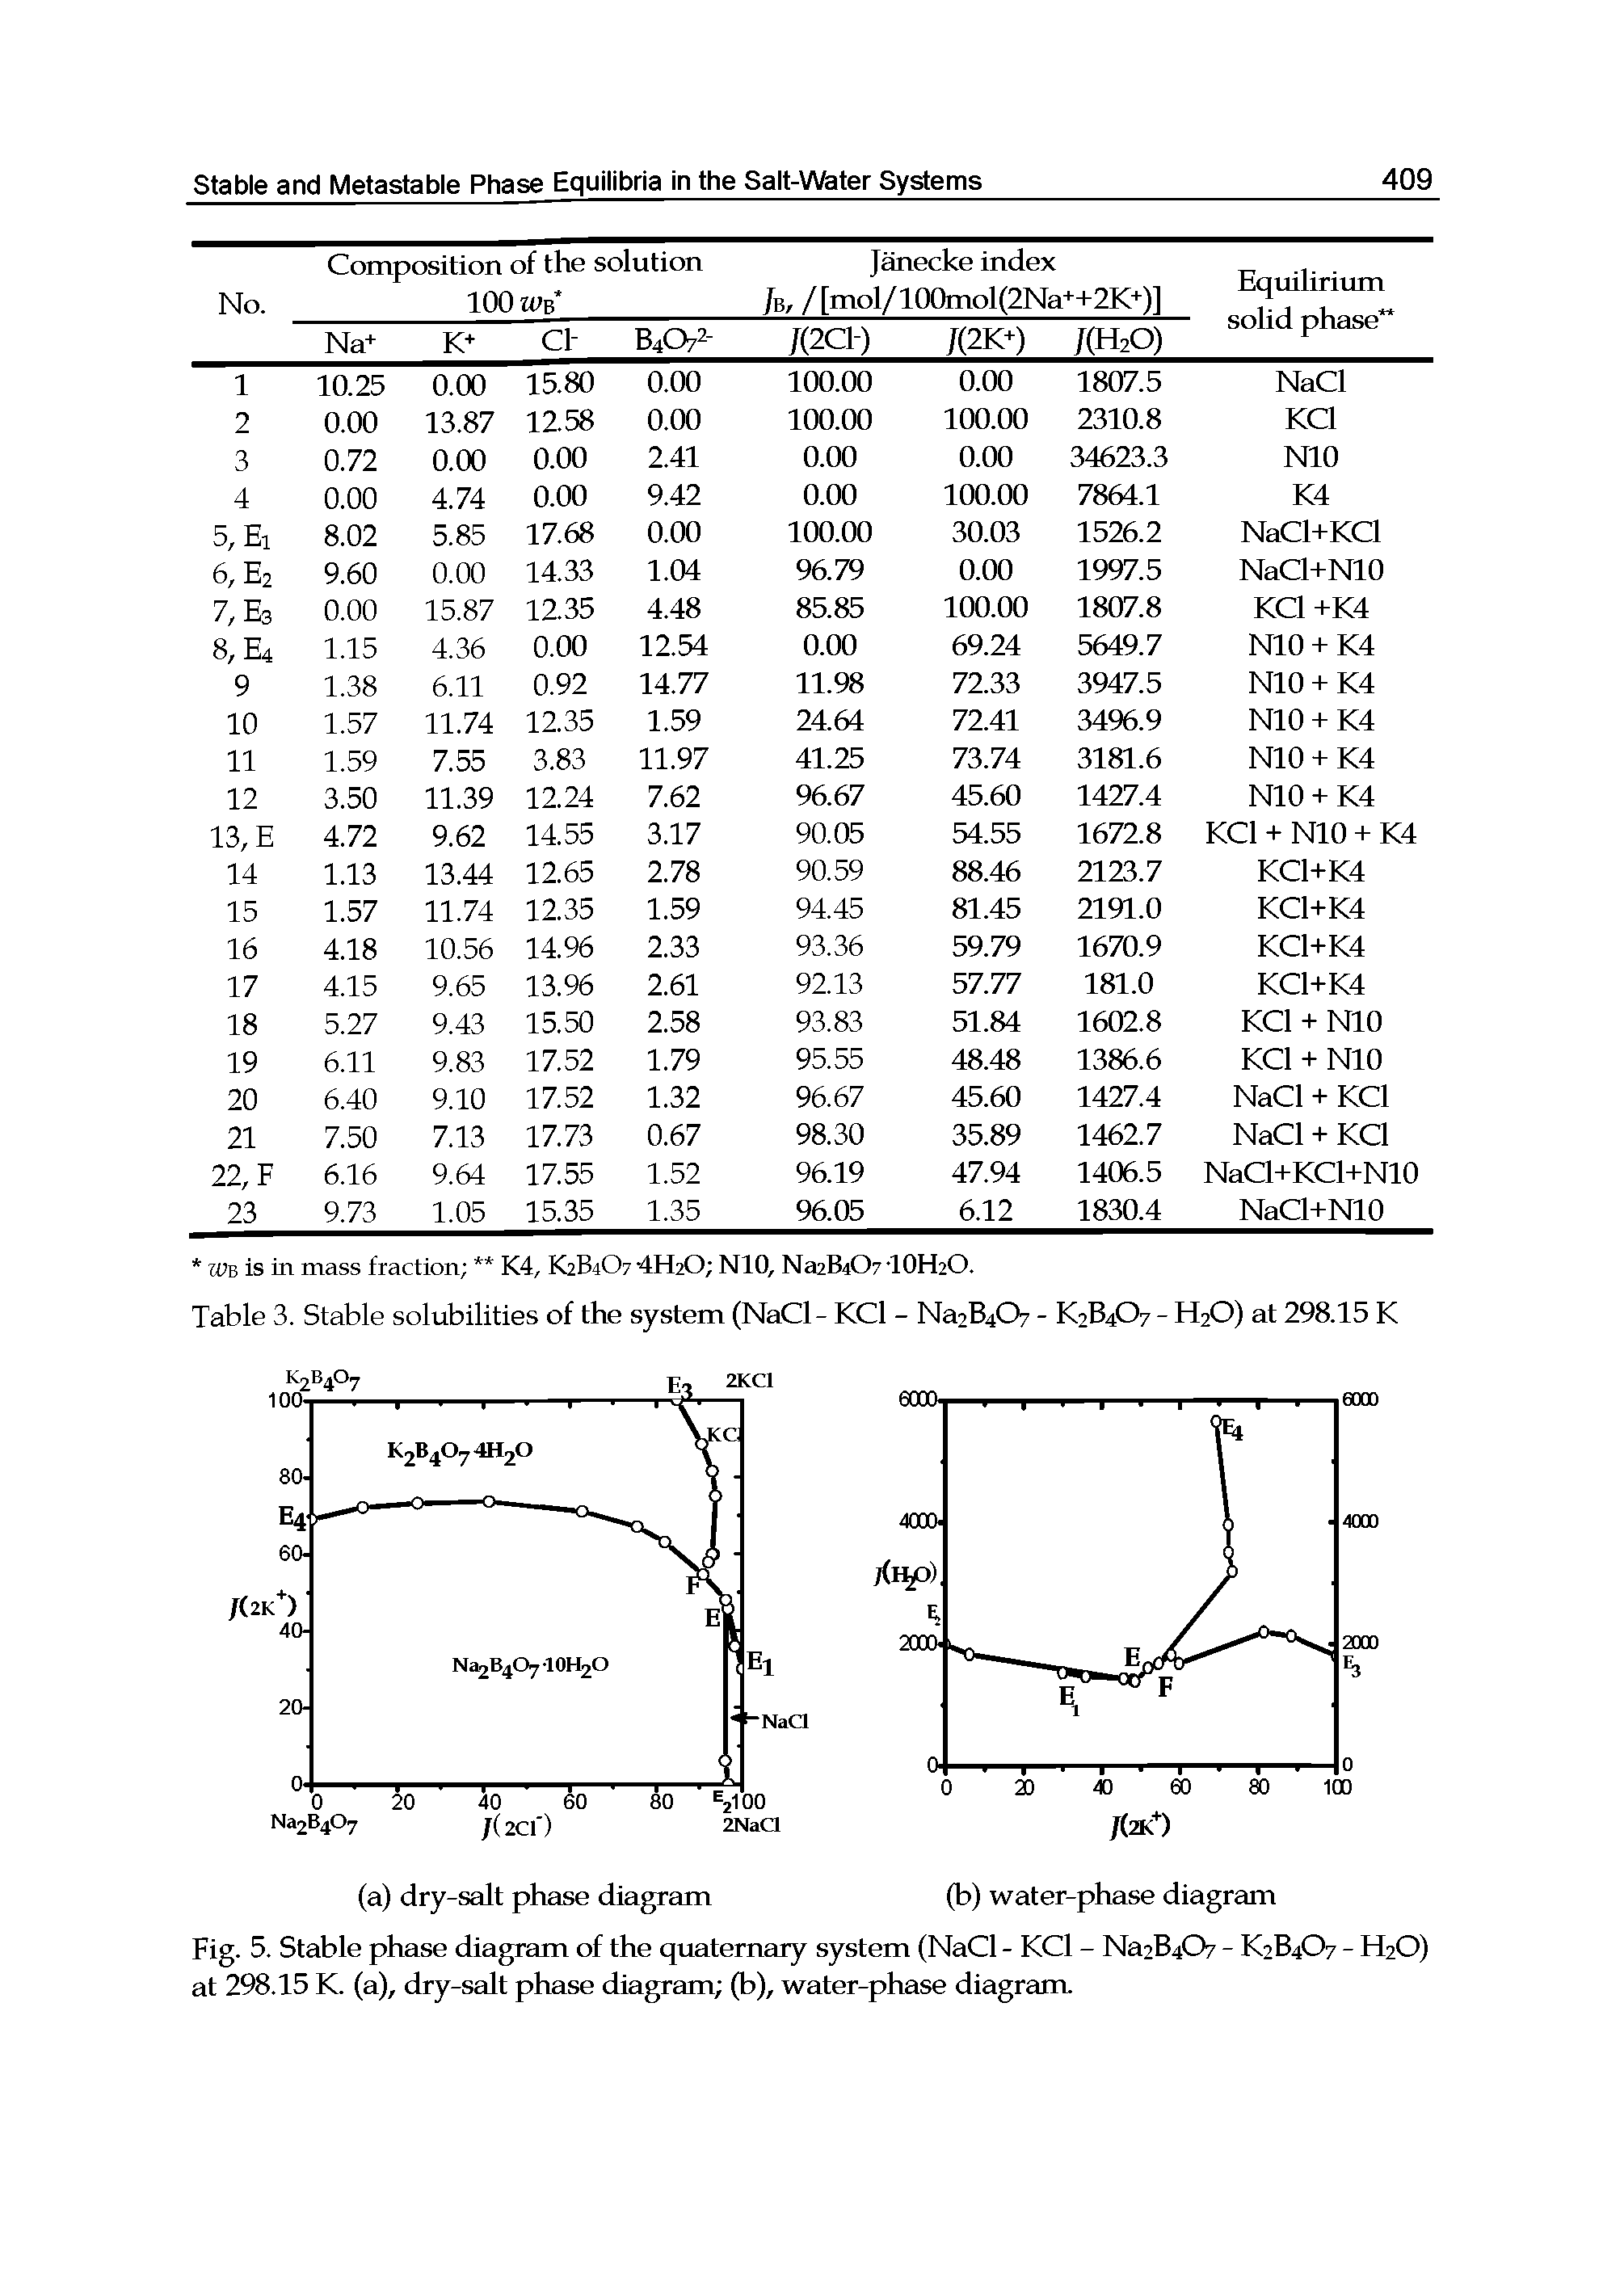 Fig. 5. Stable phase diagram of the quaternary system (NaCl - KCl - Na2B4C>7 - K2B4O7 - H2O) at 298.15 K. (a), dry-salt phase diagram (b), water-phase diagram.